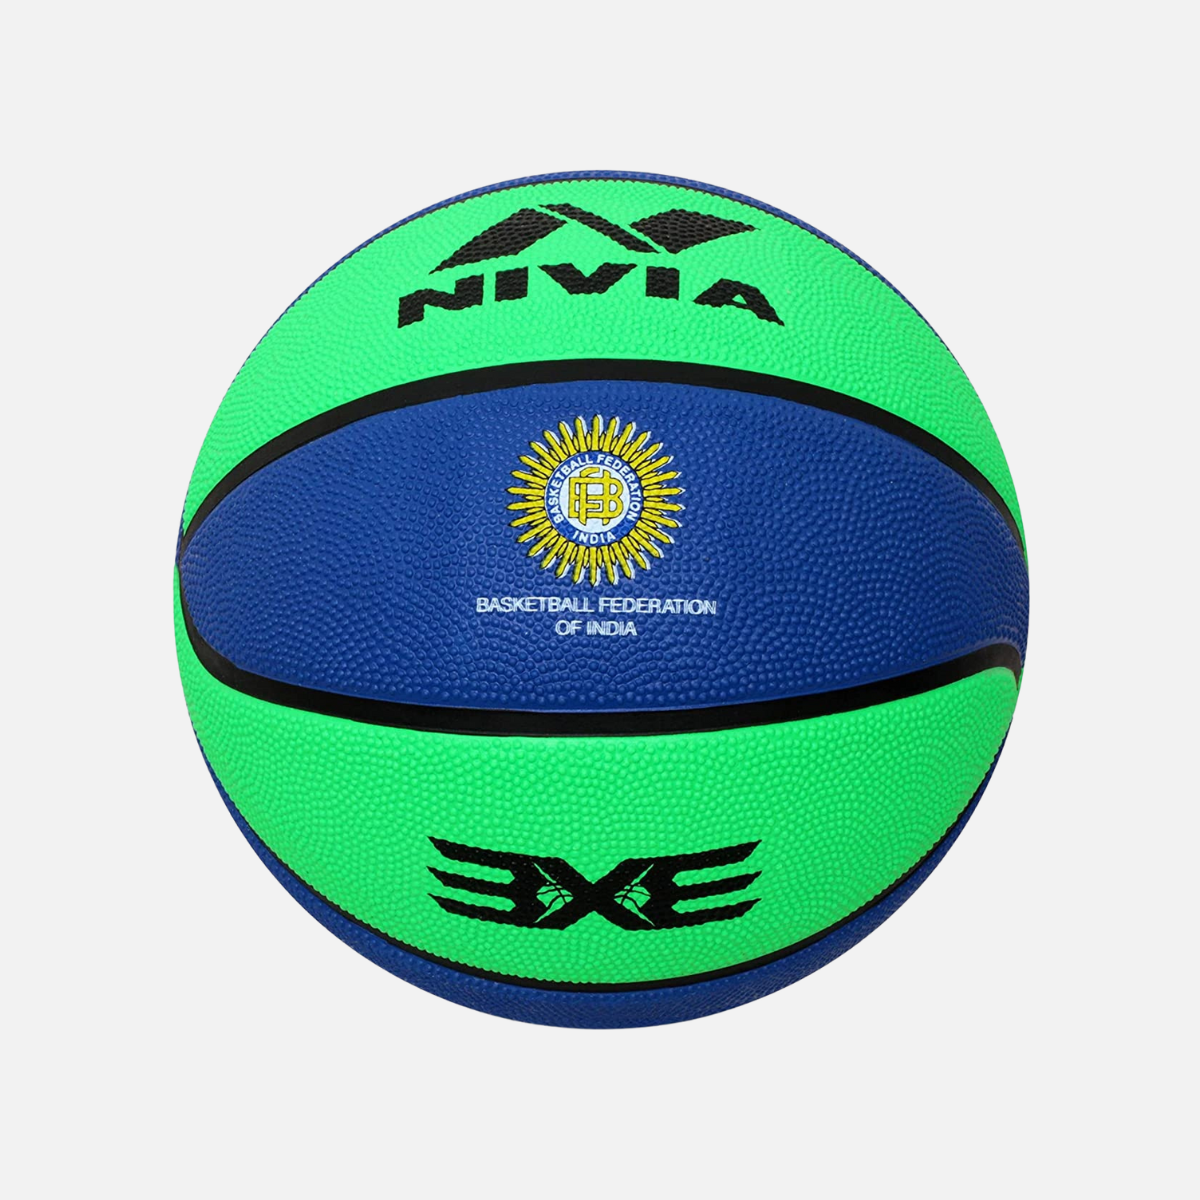 Nivia 3x3 Moulded Basketball -Green-Blue/Red-Cream